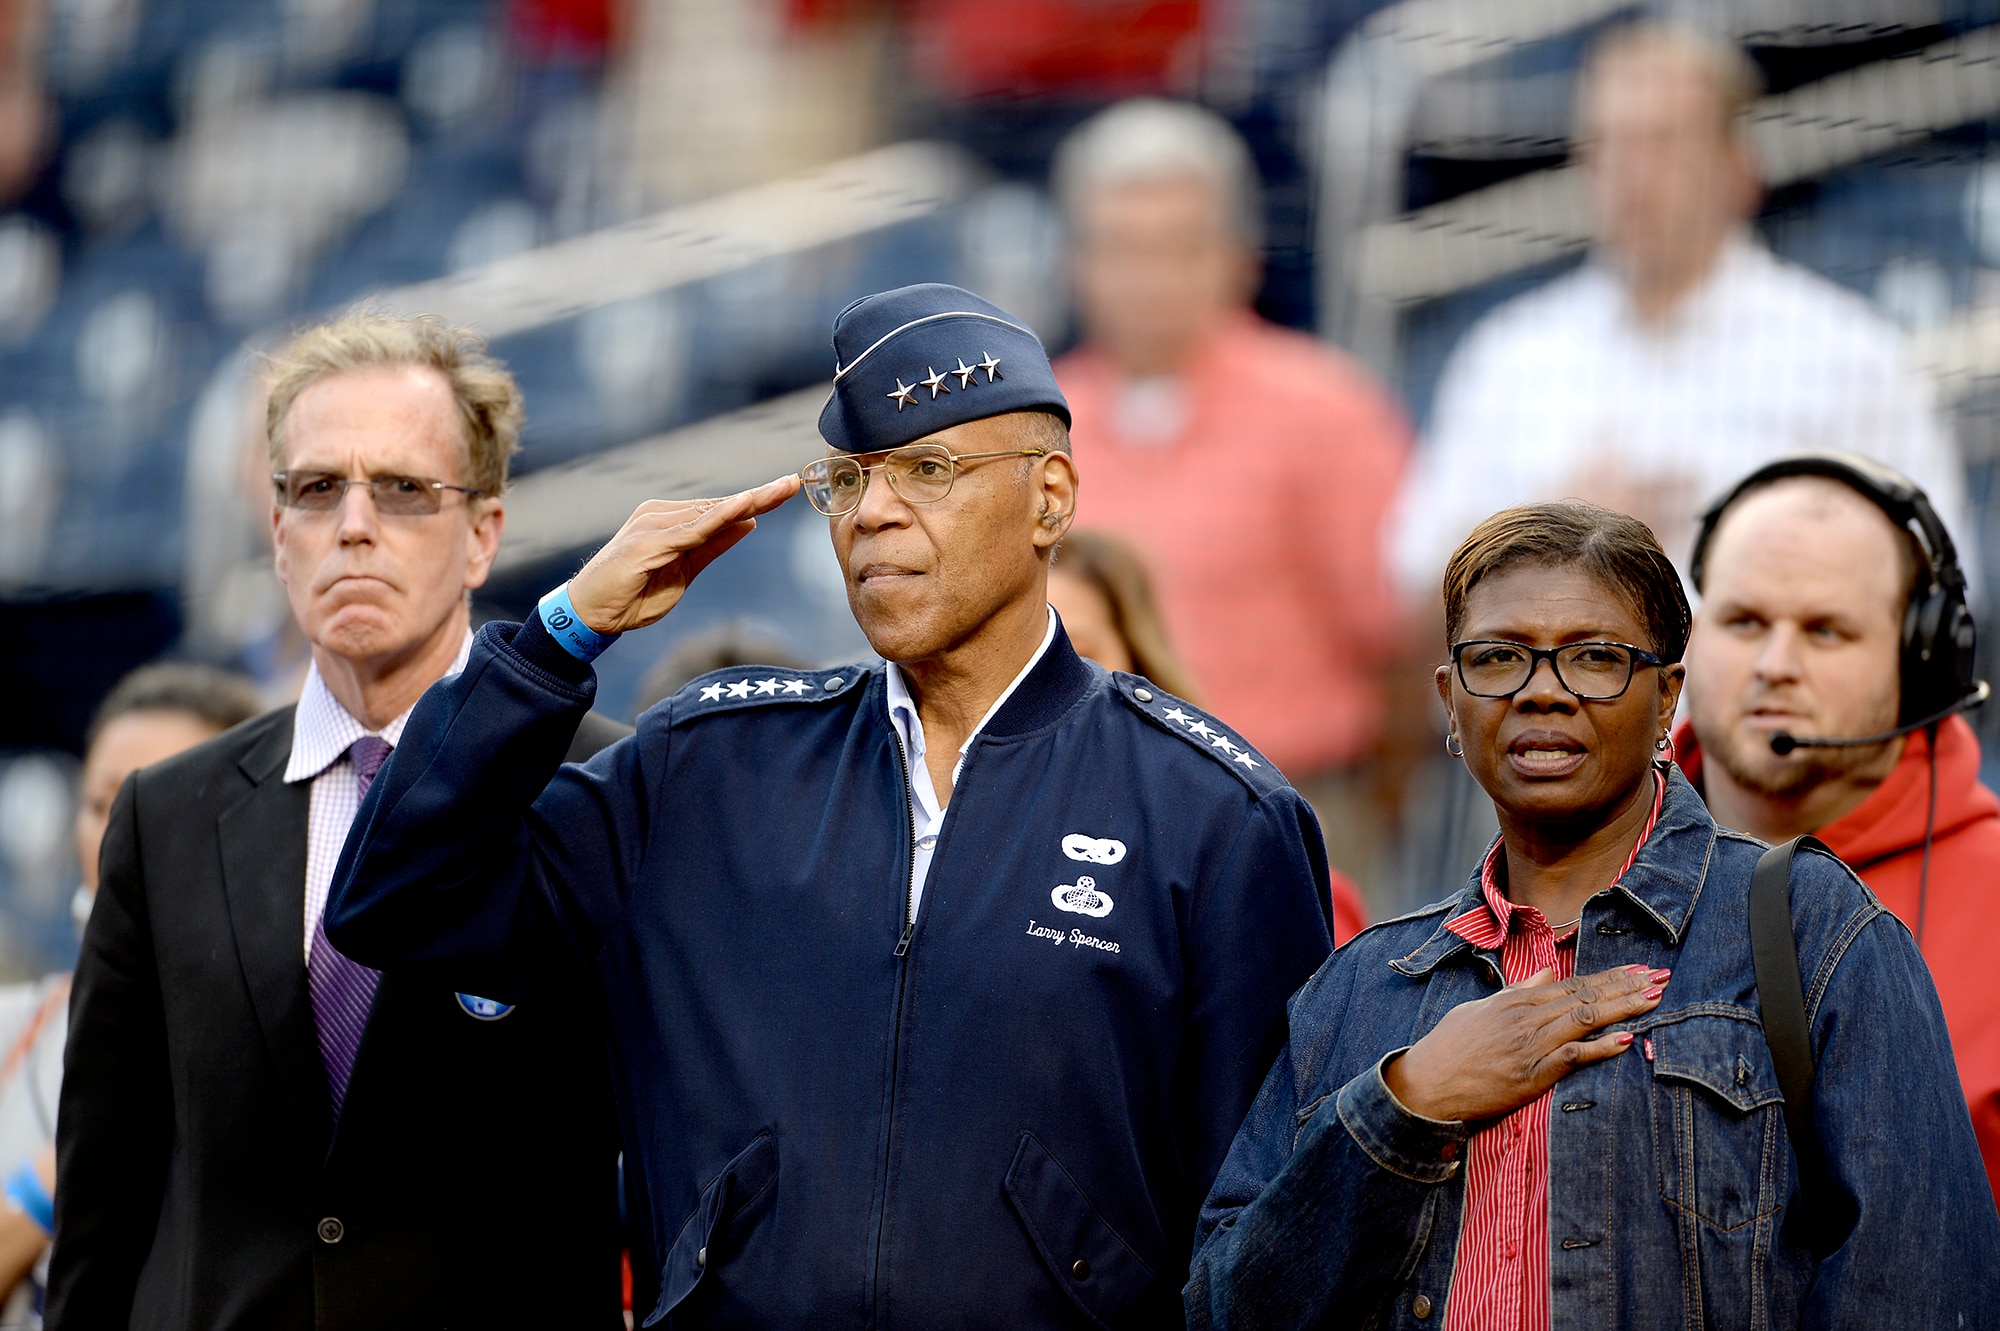 Air Force Vice Chief of Staff Gen. Larry O. Spencer, his wife, Ora, and Nationals Vice President Gregory McCarthy, stand for the National Anthem before the Washington Nationals vs. Philadelphia Phillies game in Washington, April 17, 2015.  Maj. Gen. Stayce D. Harris, the commander of the 22nd Air Force, Air Force Reserve Command, presented the game ball to the pitcher at the start of the game, as the highest-ranking black female officer in the Air Force in honor of black heritage day at Nationals Park Stadium.  She also represented the Air Force Reserve for its 67th birthday.  (U.S. Air Force photo/Scott M. Ash)